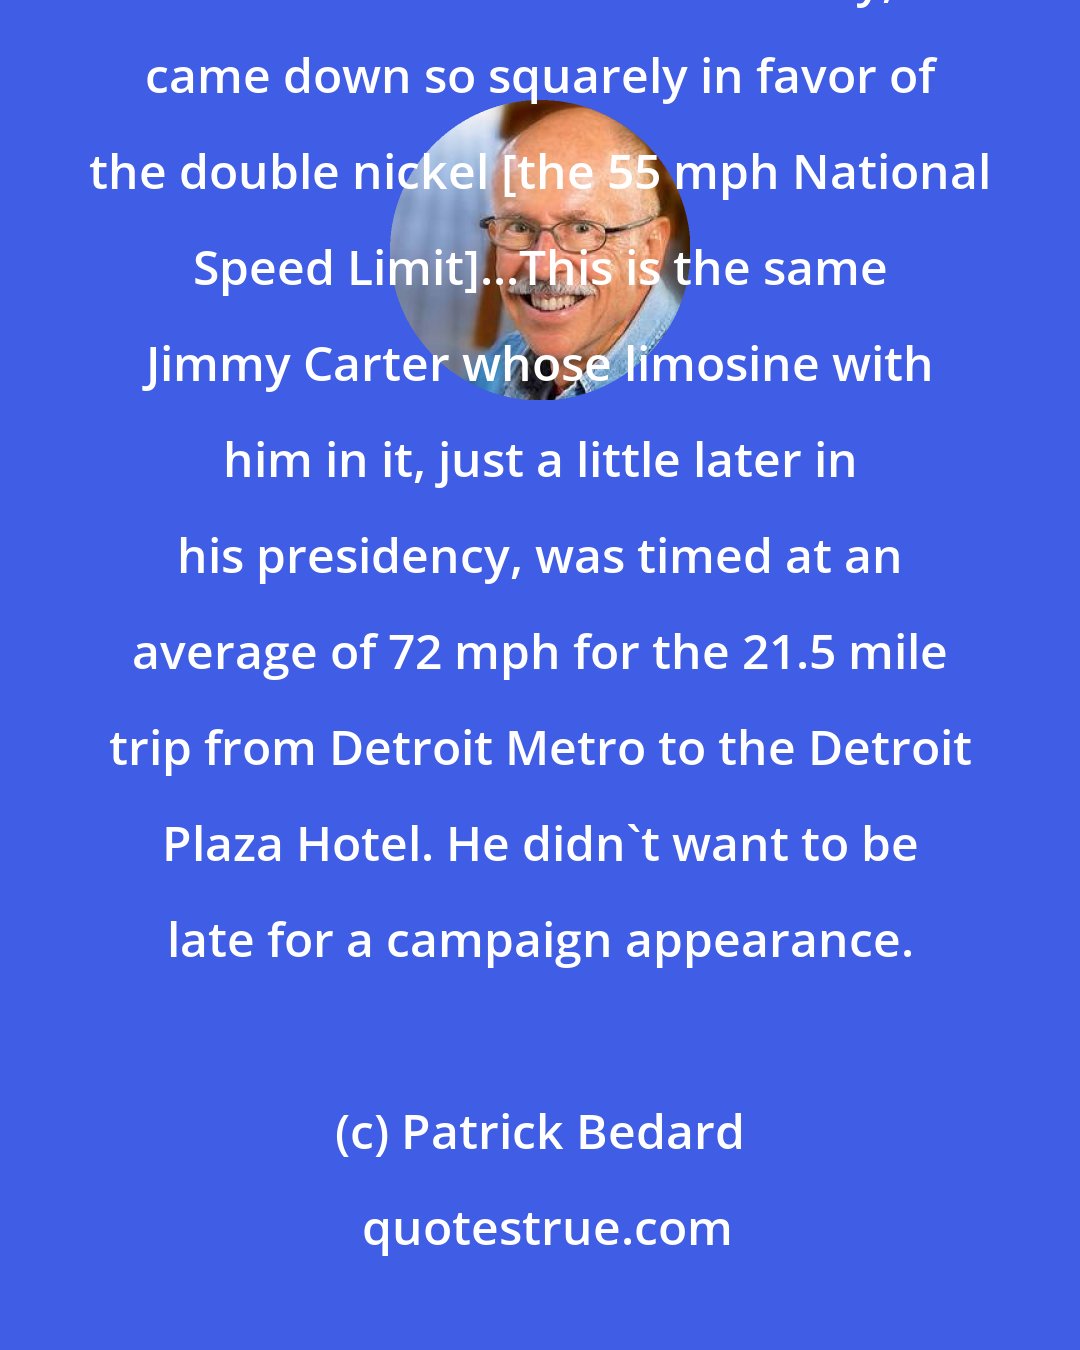 Patrick Bedard: Jimmy Carter, who embraced all manner of schemes to make America a second or third-rate country, came down so squarely in favor of the double nickel [the 55 mph National Speed Limit]...This is the same Jimmy Carter whose limosine with him in it, just a little later in his presidency, was timed at an average of 72 mph for the 21.5 mile trip from Detroit Metro to the Detroit Plaza Hotel. He didn't want to be late for a campaign appearance.